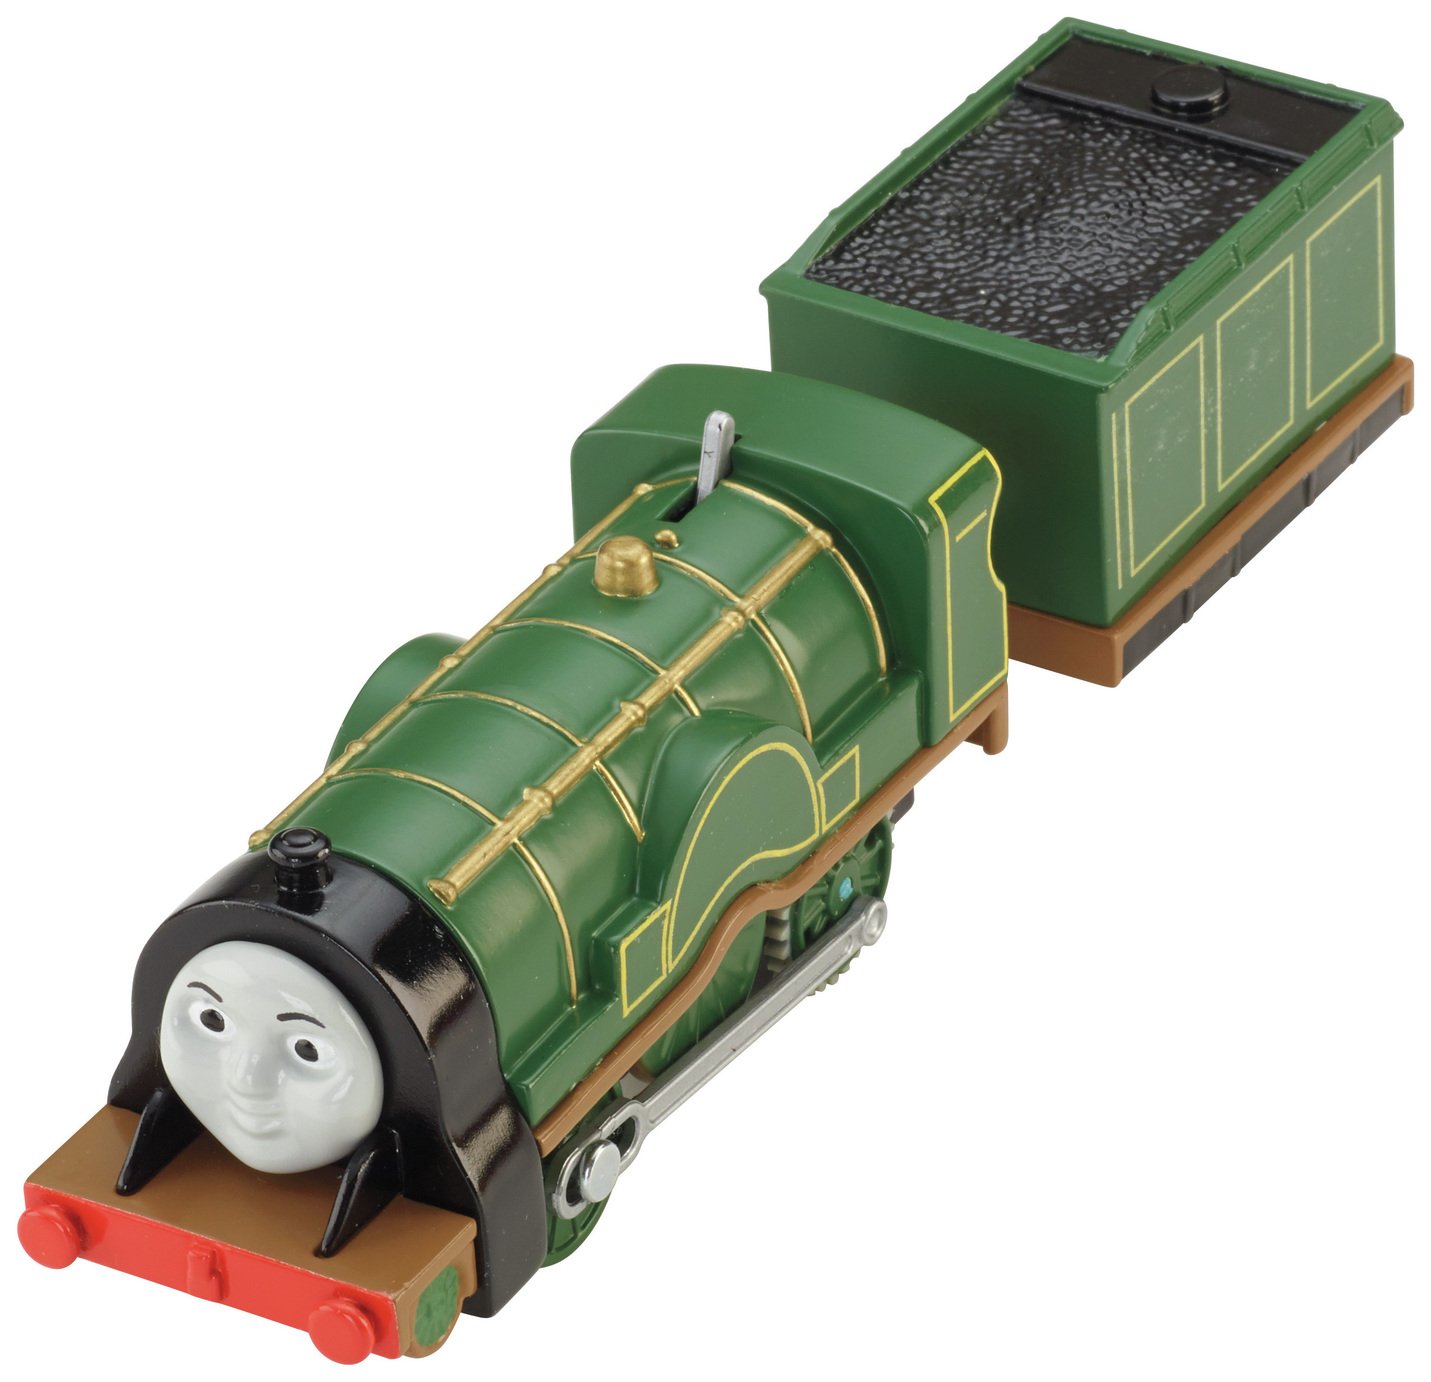 Thomas & Friends TrackMaster Emily review